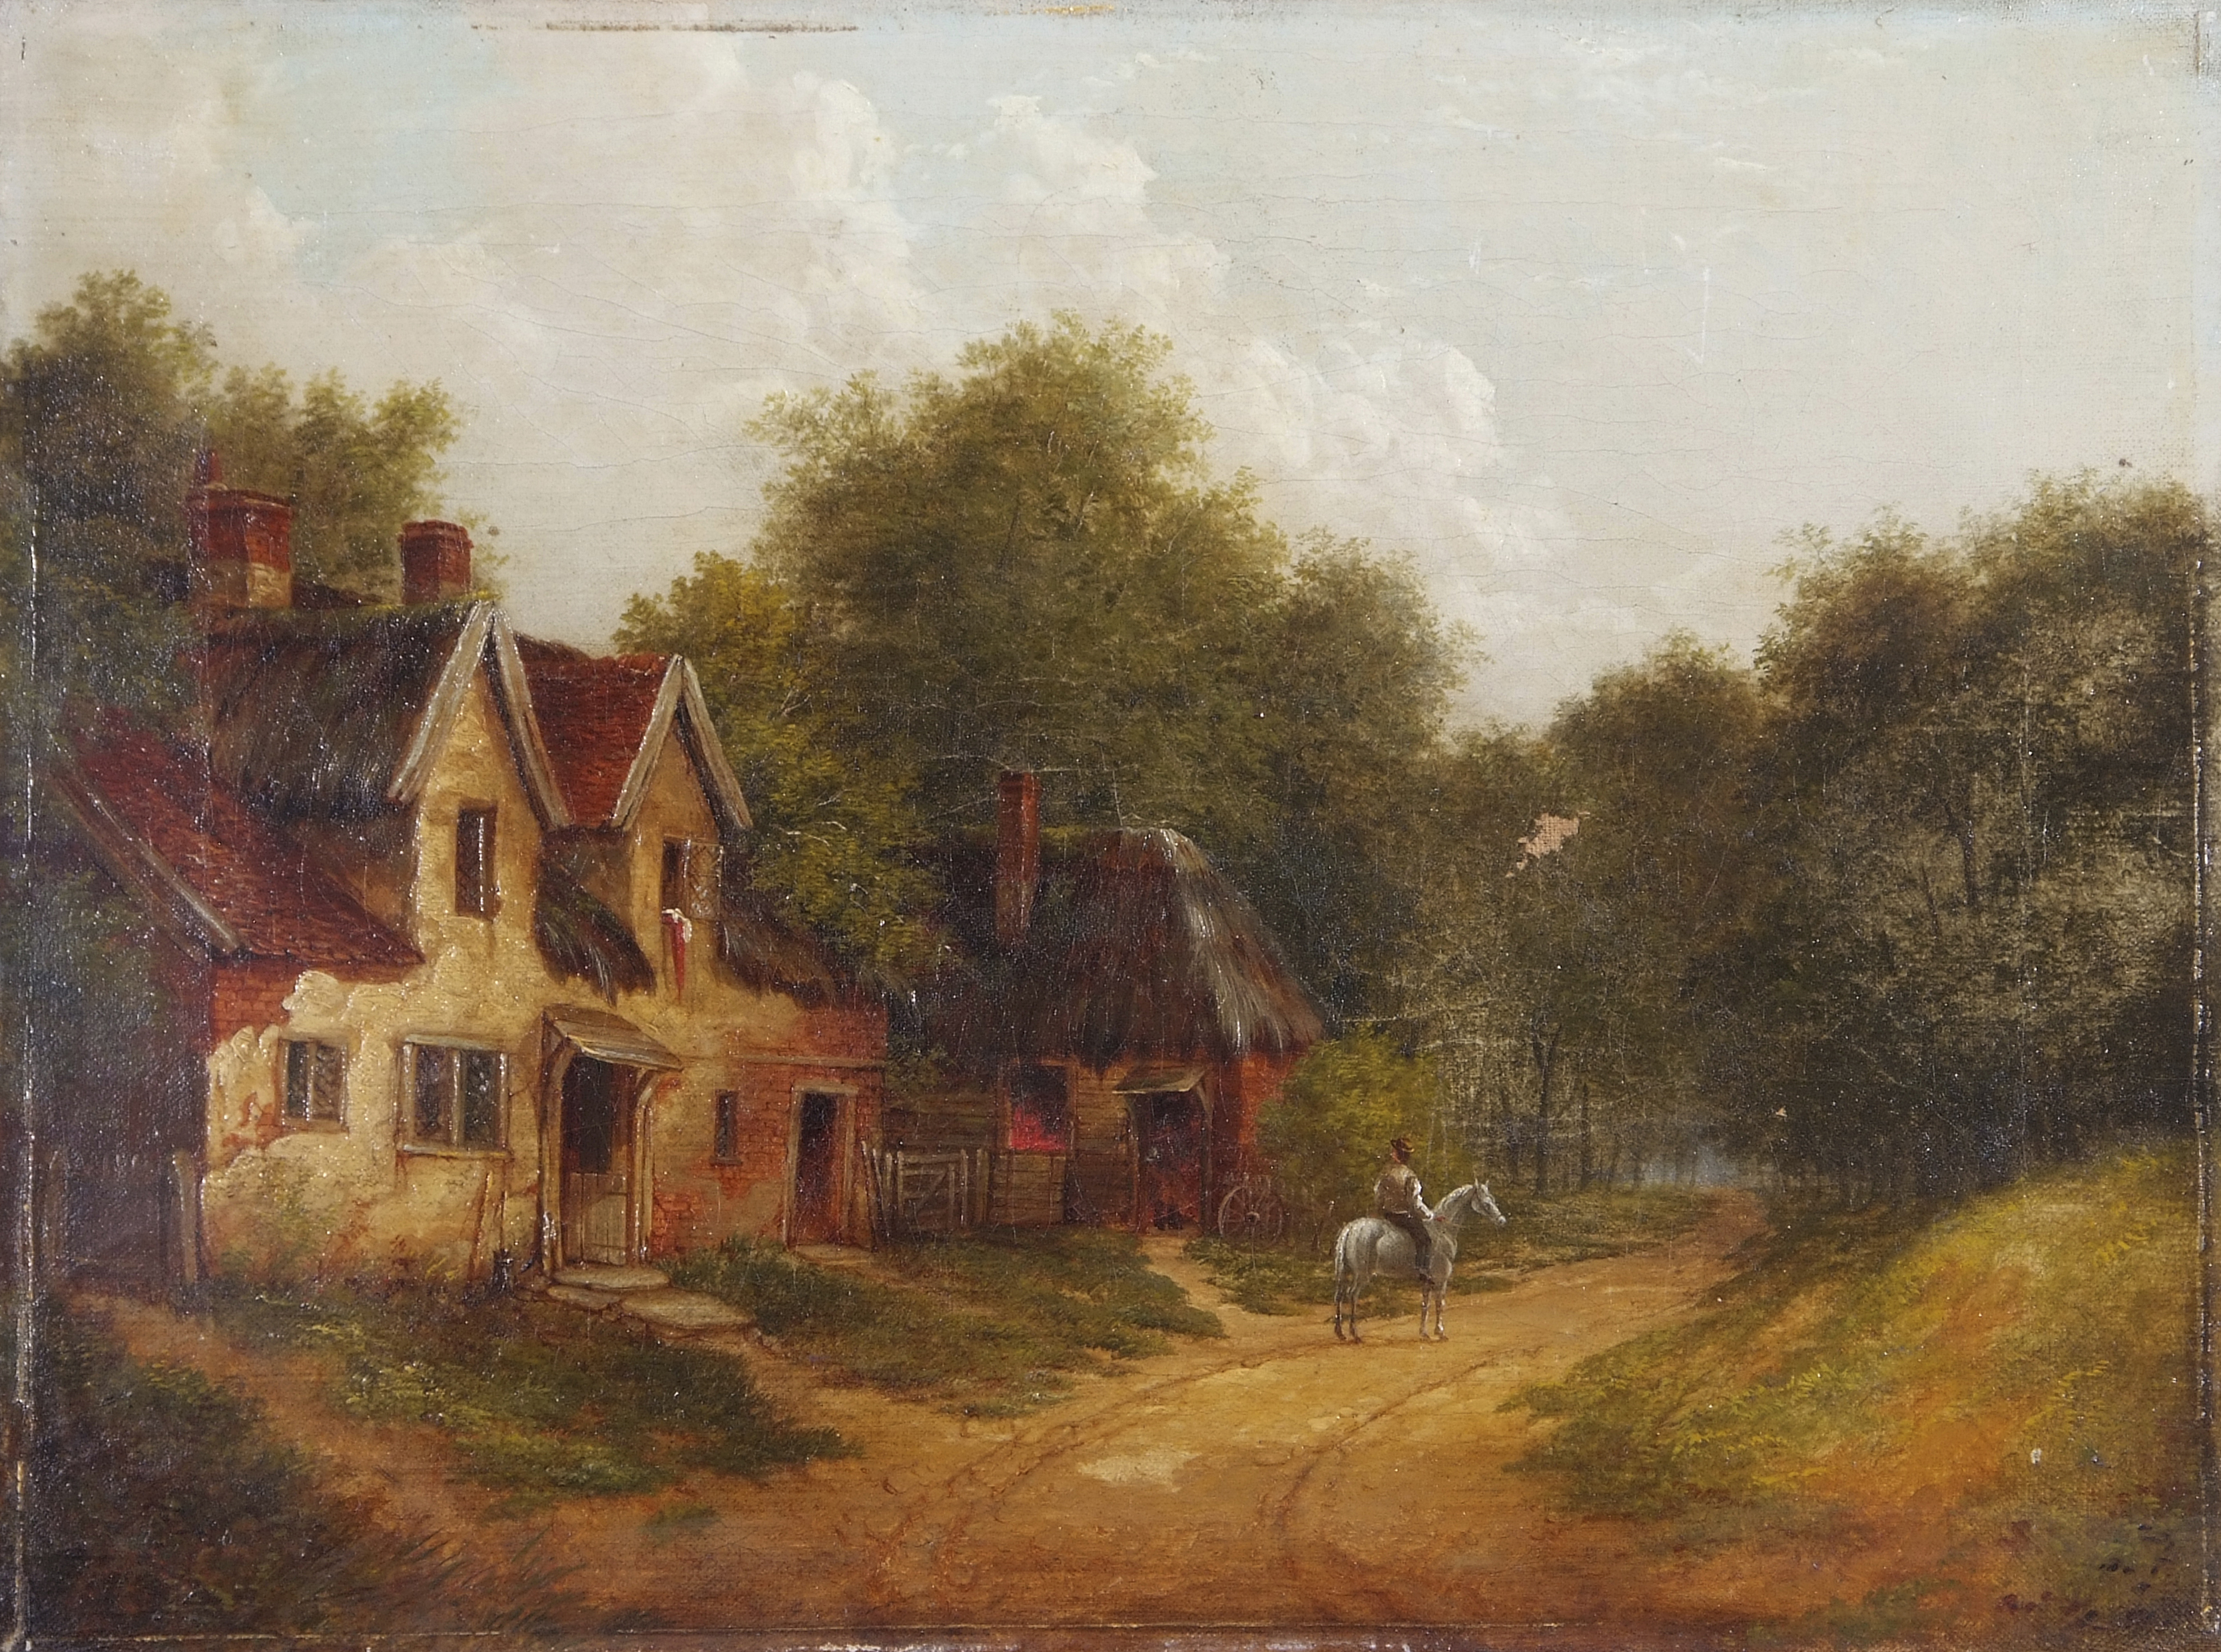 Edward Littlewood (1863-1896), Figure on Horse before a Cottage in Woodland, oil on canvas, 31 x